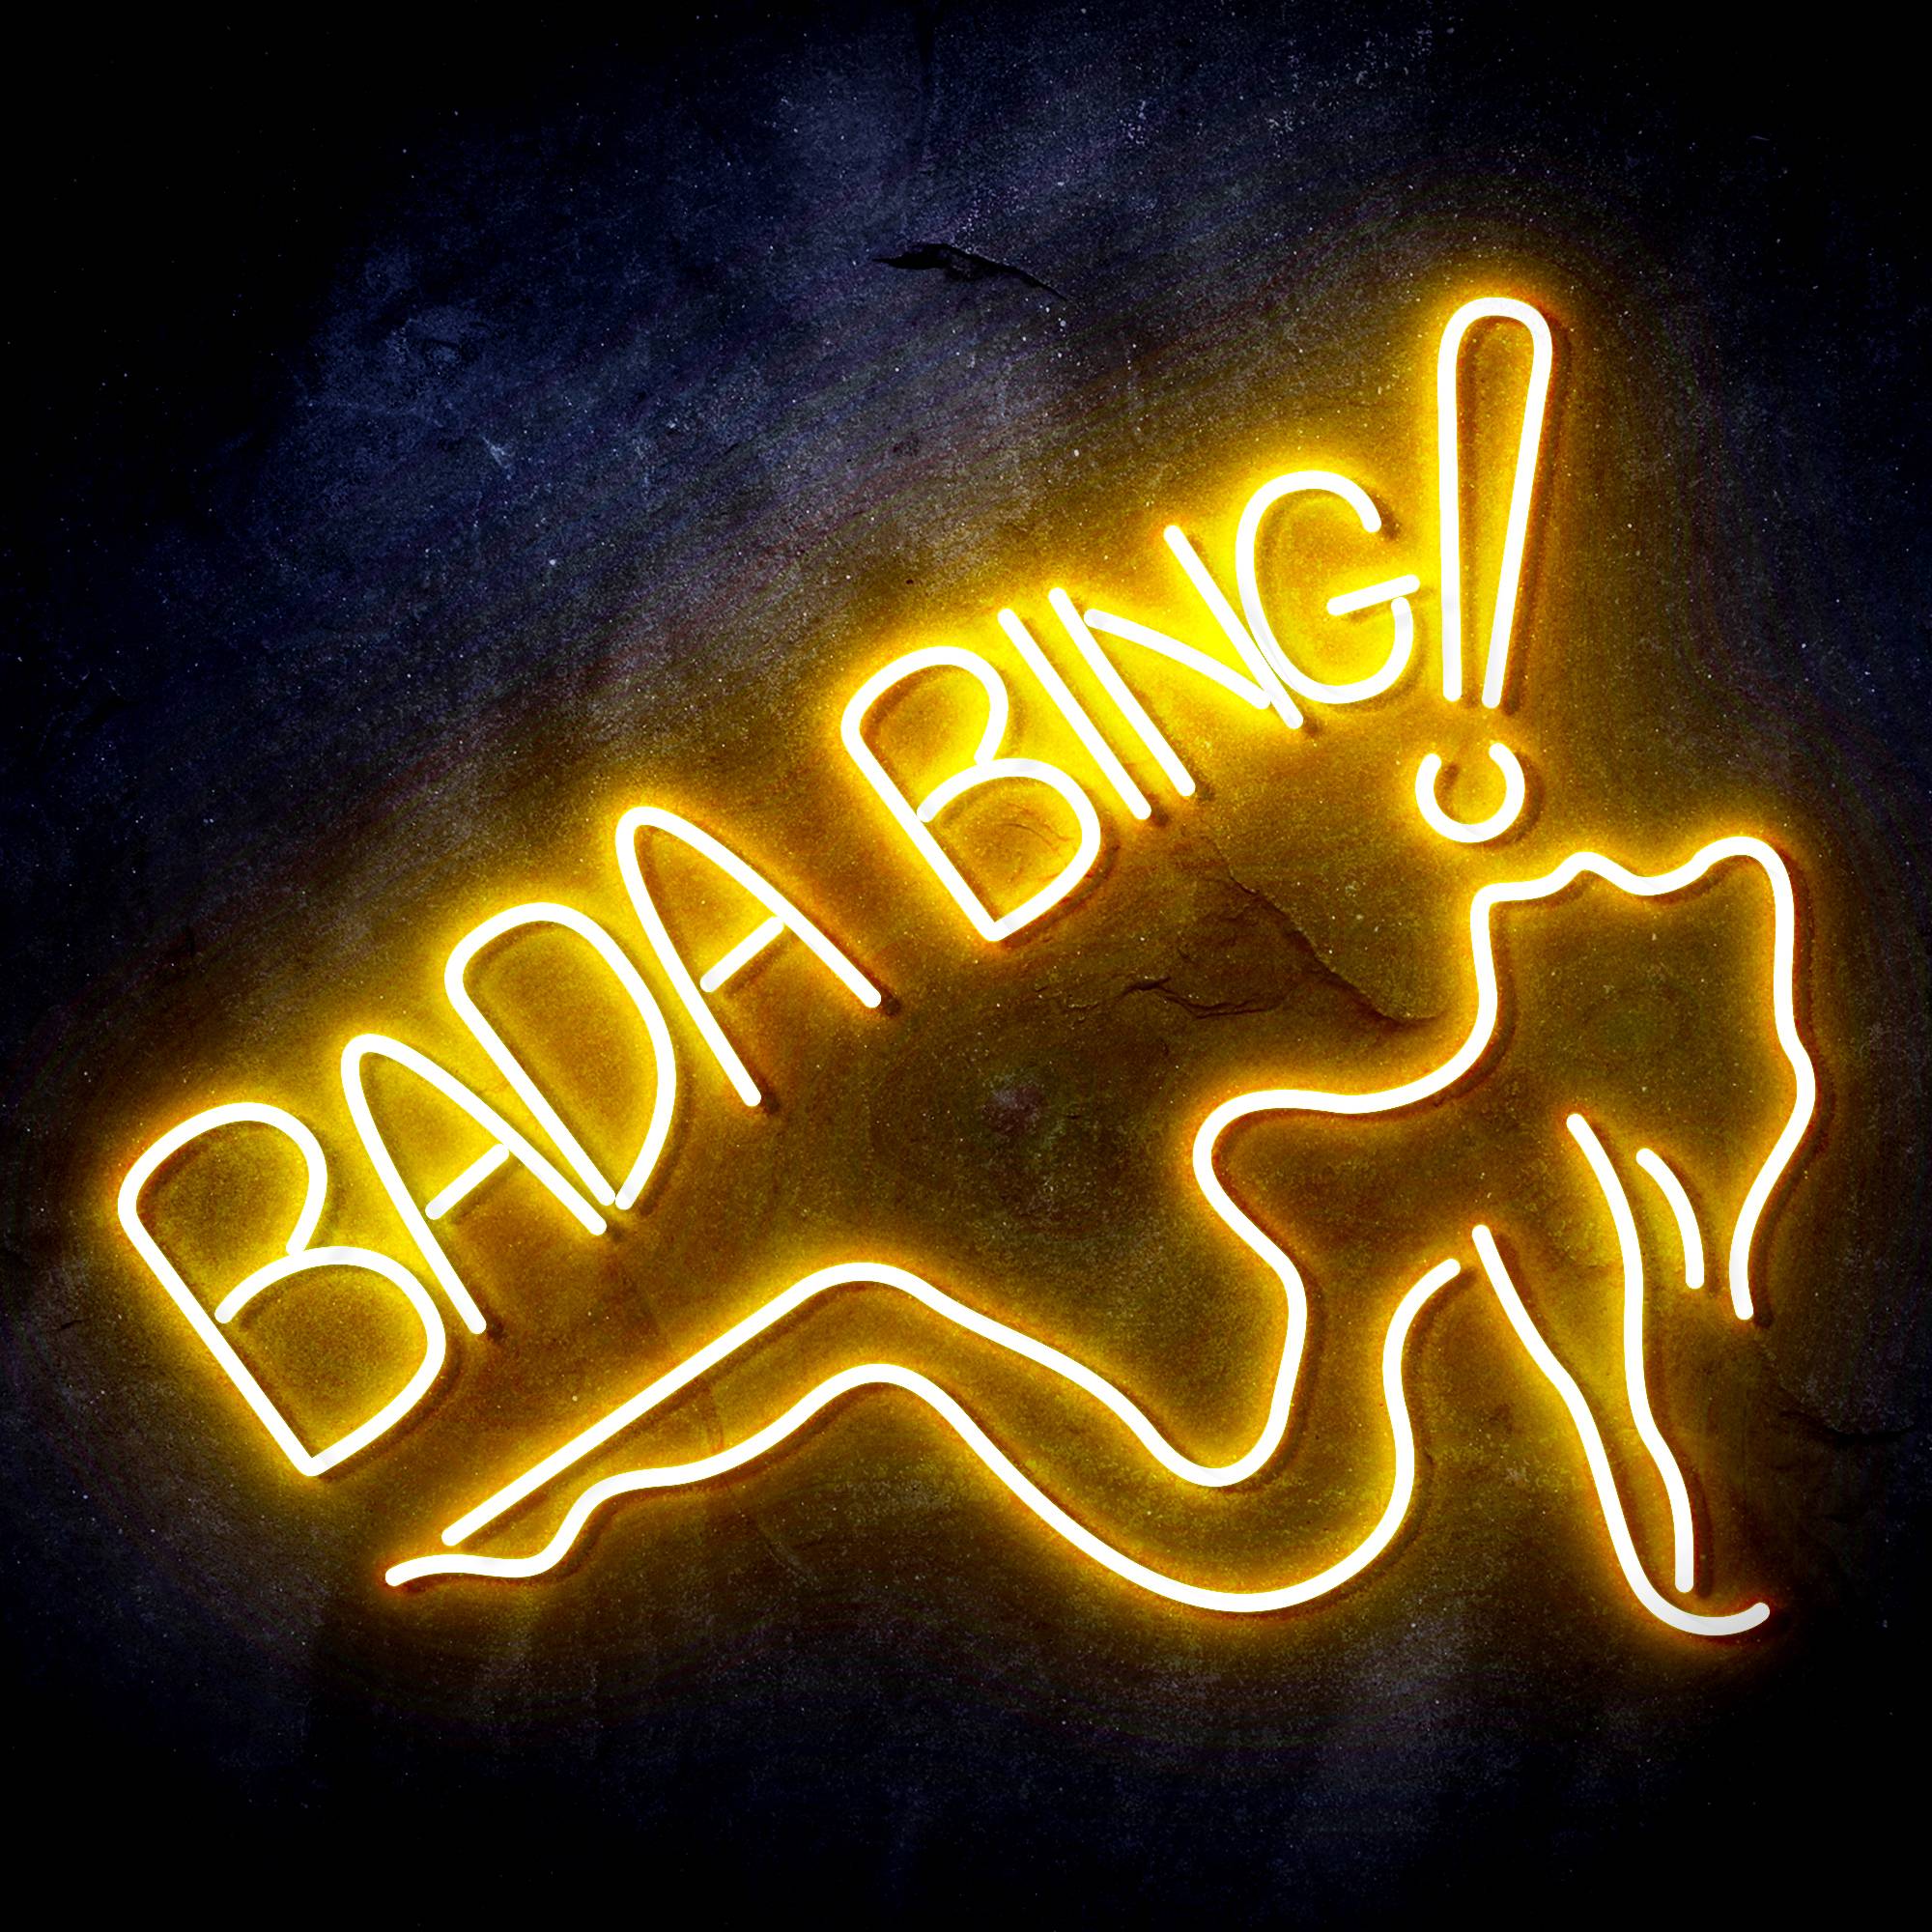 Bada Bing! With Sexy Lady LED Neon Sign